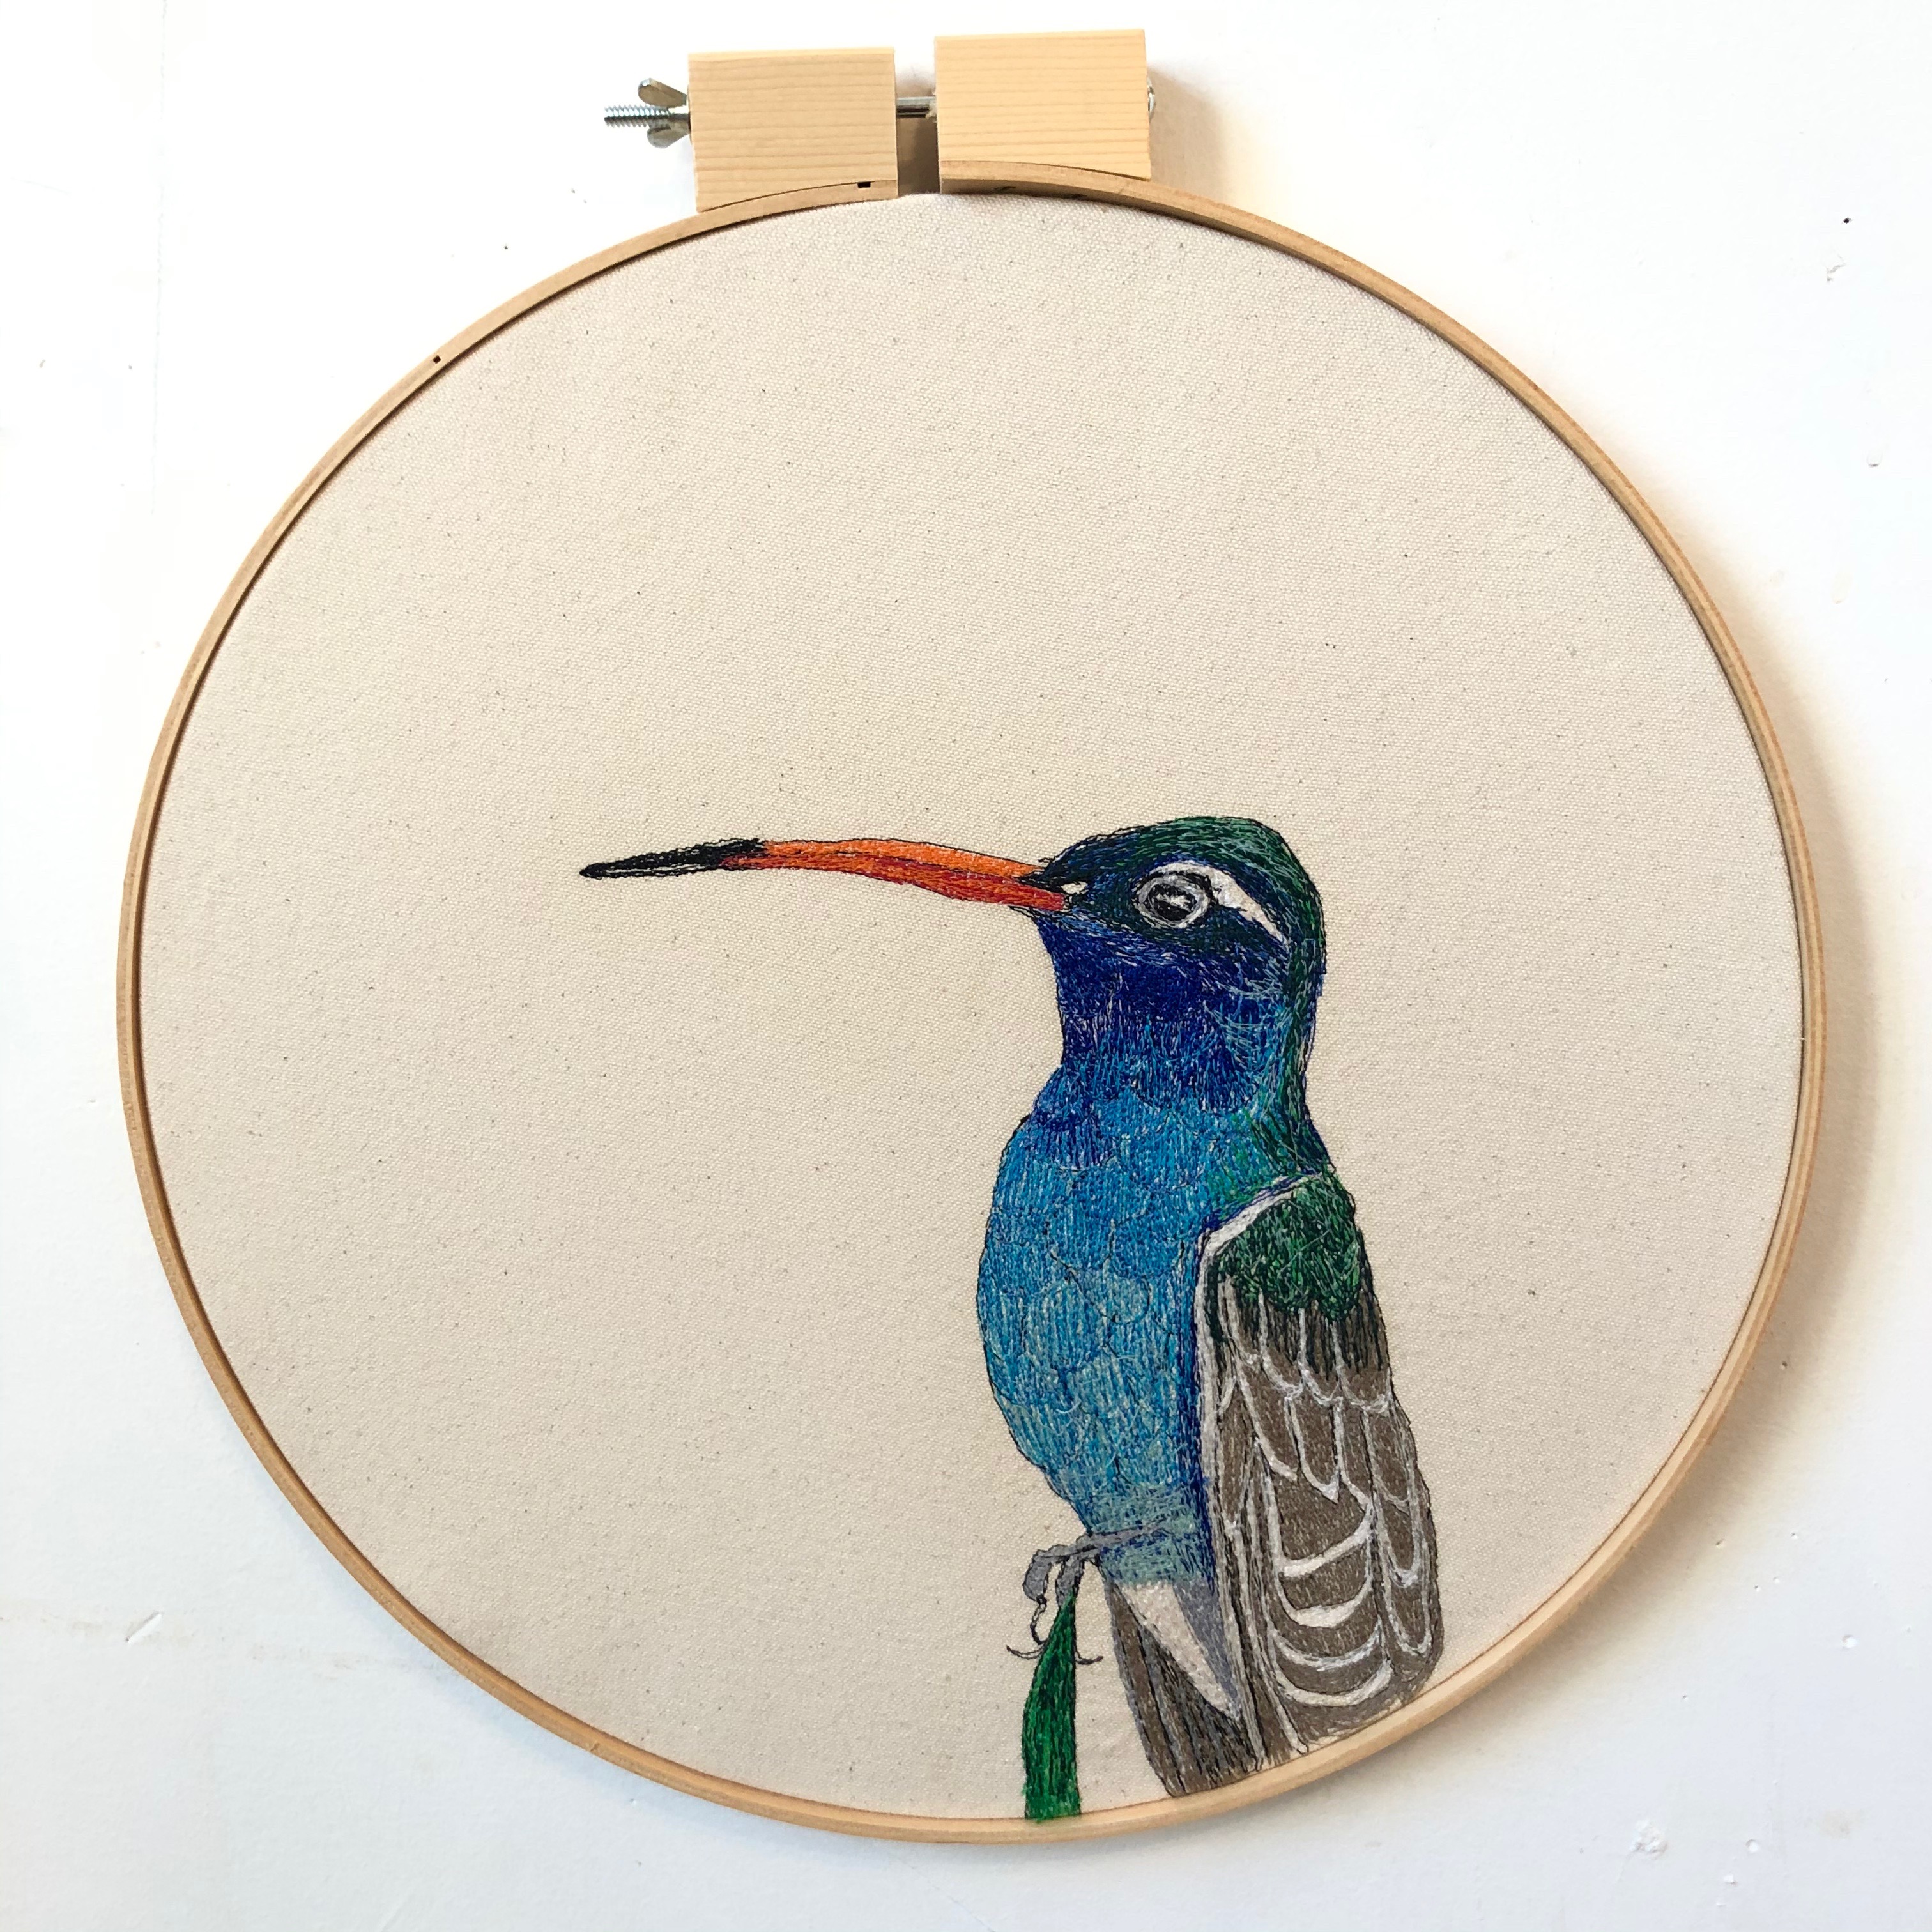 fiberart, freehand machine stitched, embroidery, thread painting, endangered birds, climate change, environmental art 